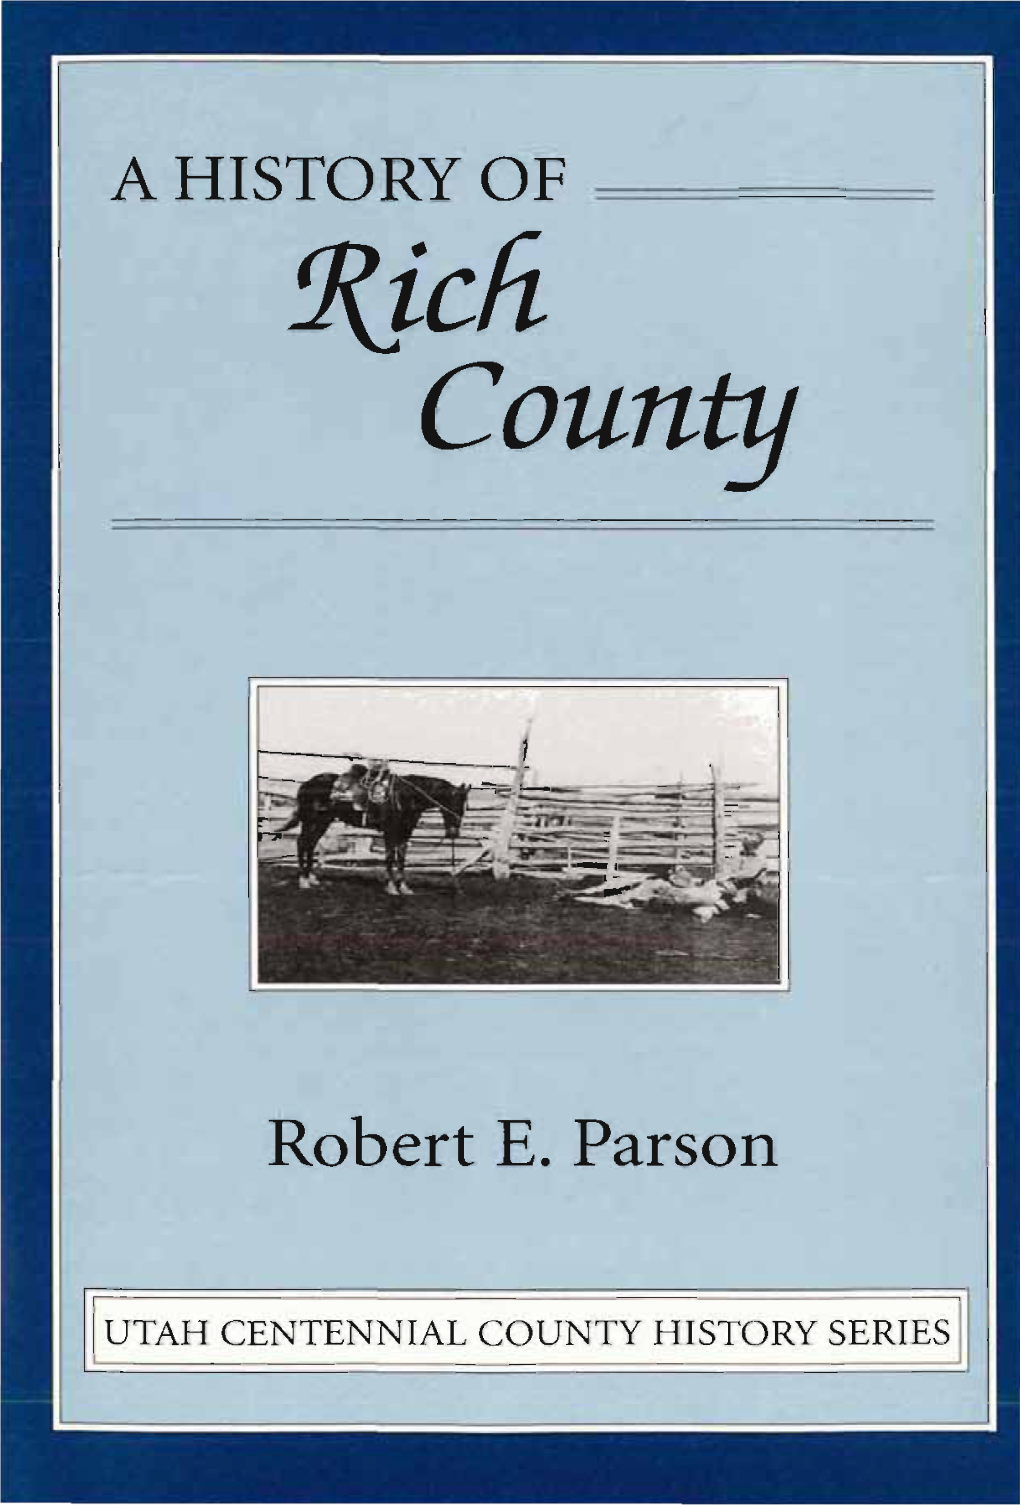 A History of Rich County, Utah Centennial County History Series